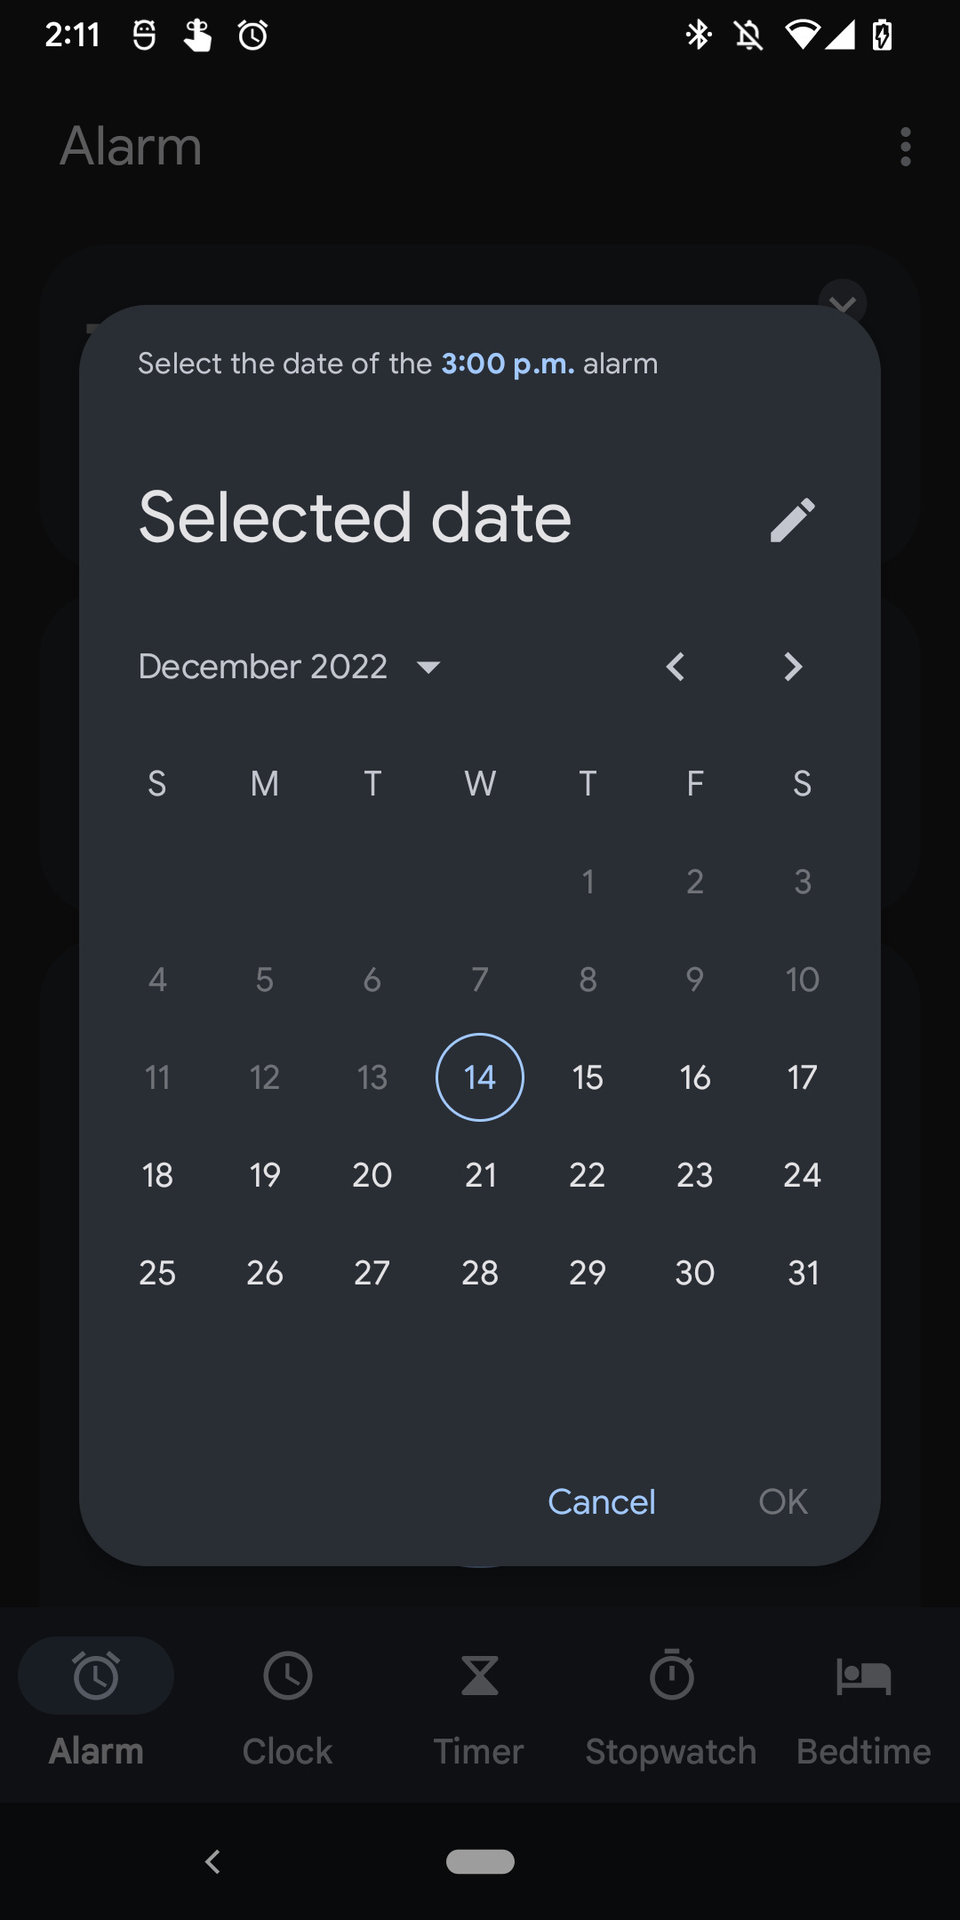 A screenshot of the Android clock app showing the alarms tab with a calendar pop-up for scheduling an alarm on a later date.